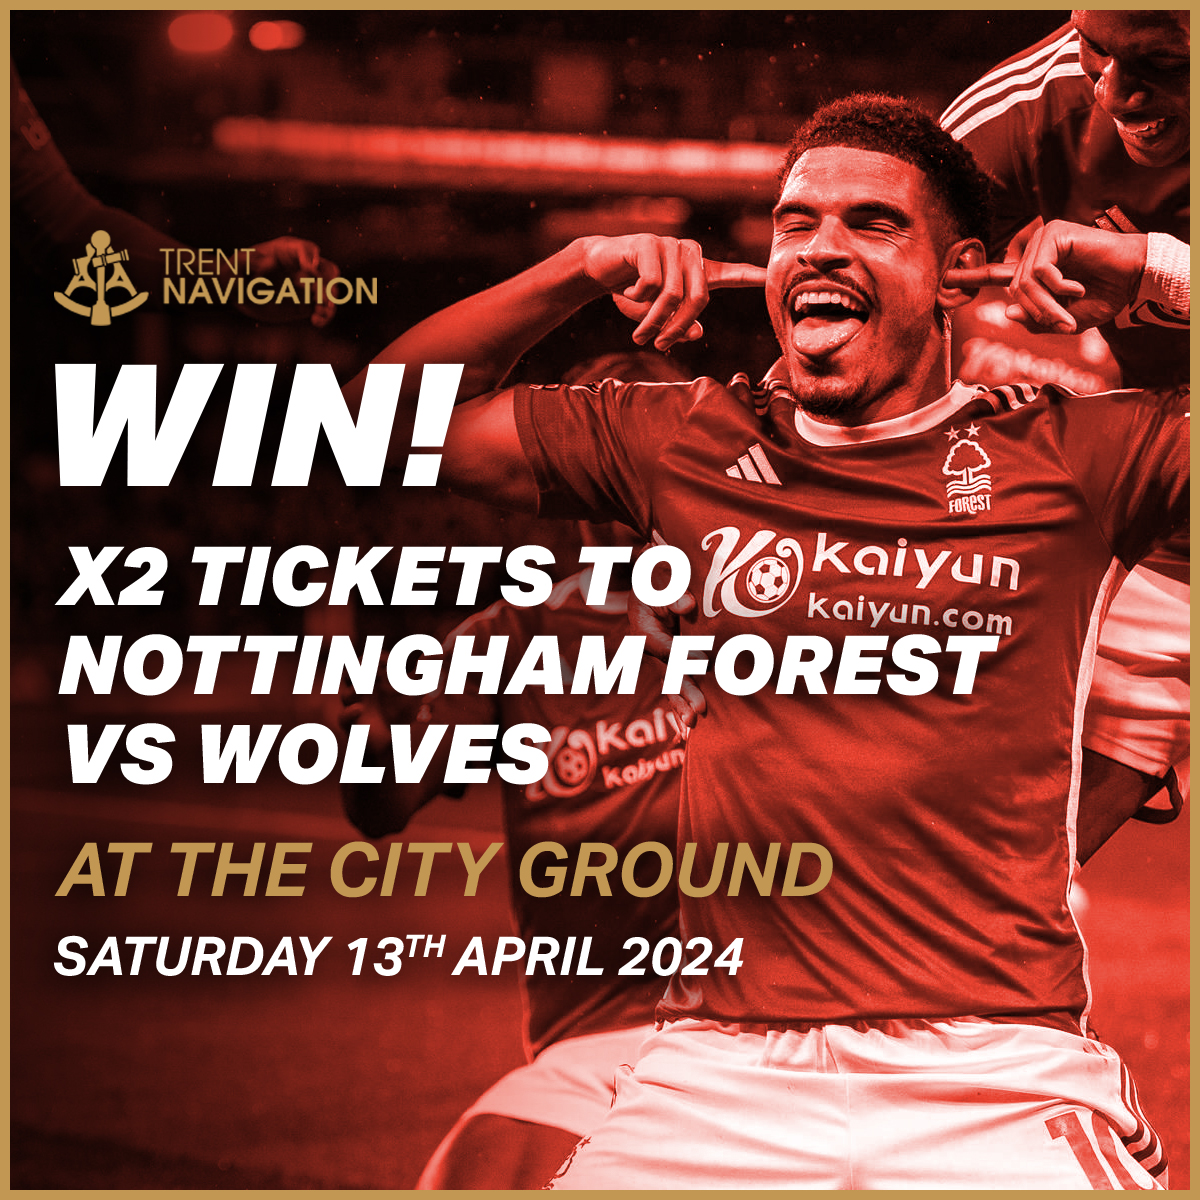 WIN! It's competition time 🌟 We have 2 tickets up for grabs to watch Forest take on Wolves at The City Ground on Saturday 13th April ⚽️ To enter, simply: 👍 Follow us ↗️ Re-share this post We'll be announcing the winner next week - good luck!